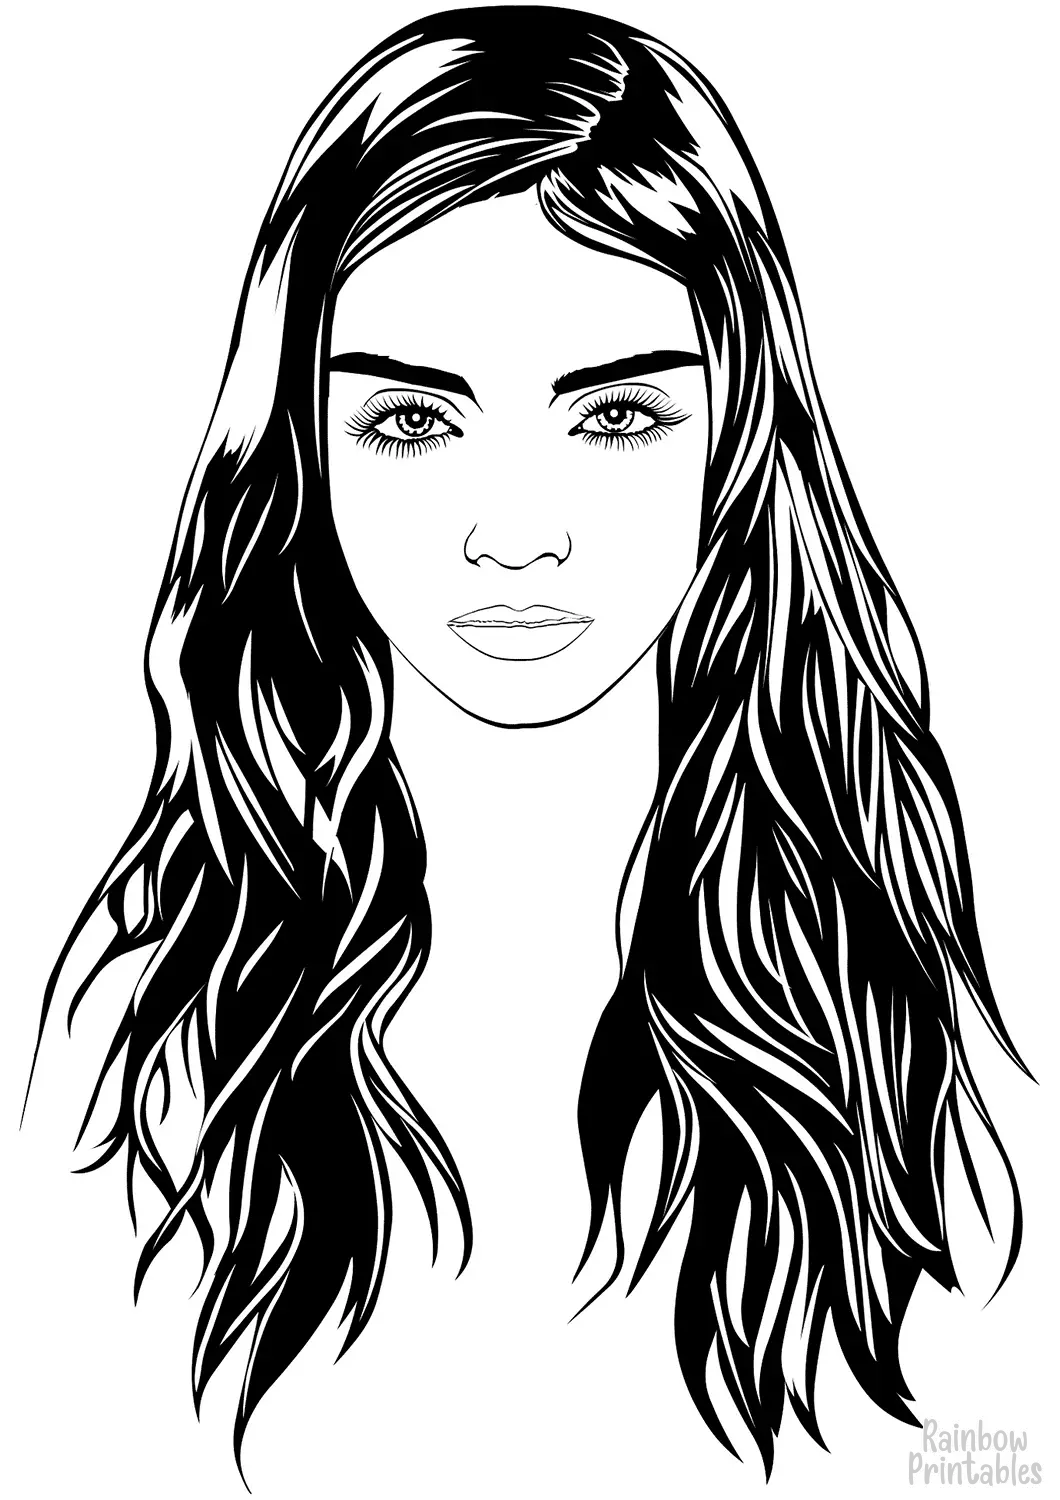 BEAUTIFUL WOMAN BRUNETTE Portrait Girl Free Clipart Coloring Pages for Kids Adults Art Activities Line Art